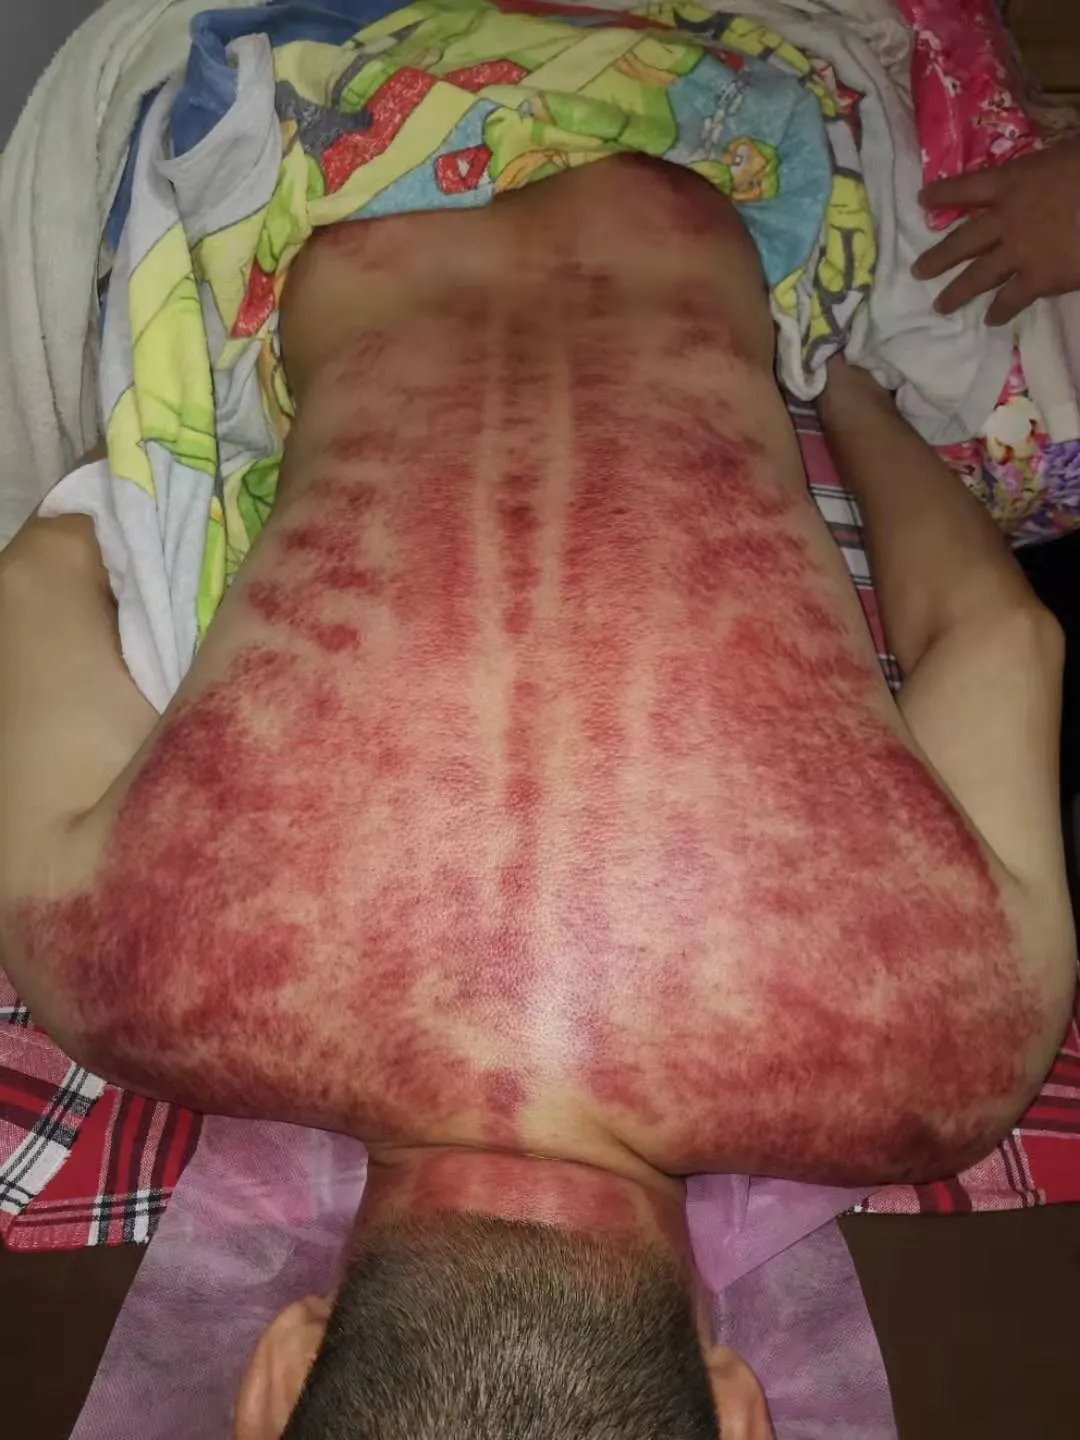 Scraping anti-inflammatory Therapy. (Authentic image from China)